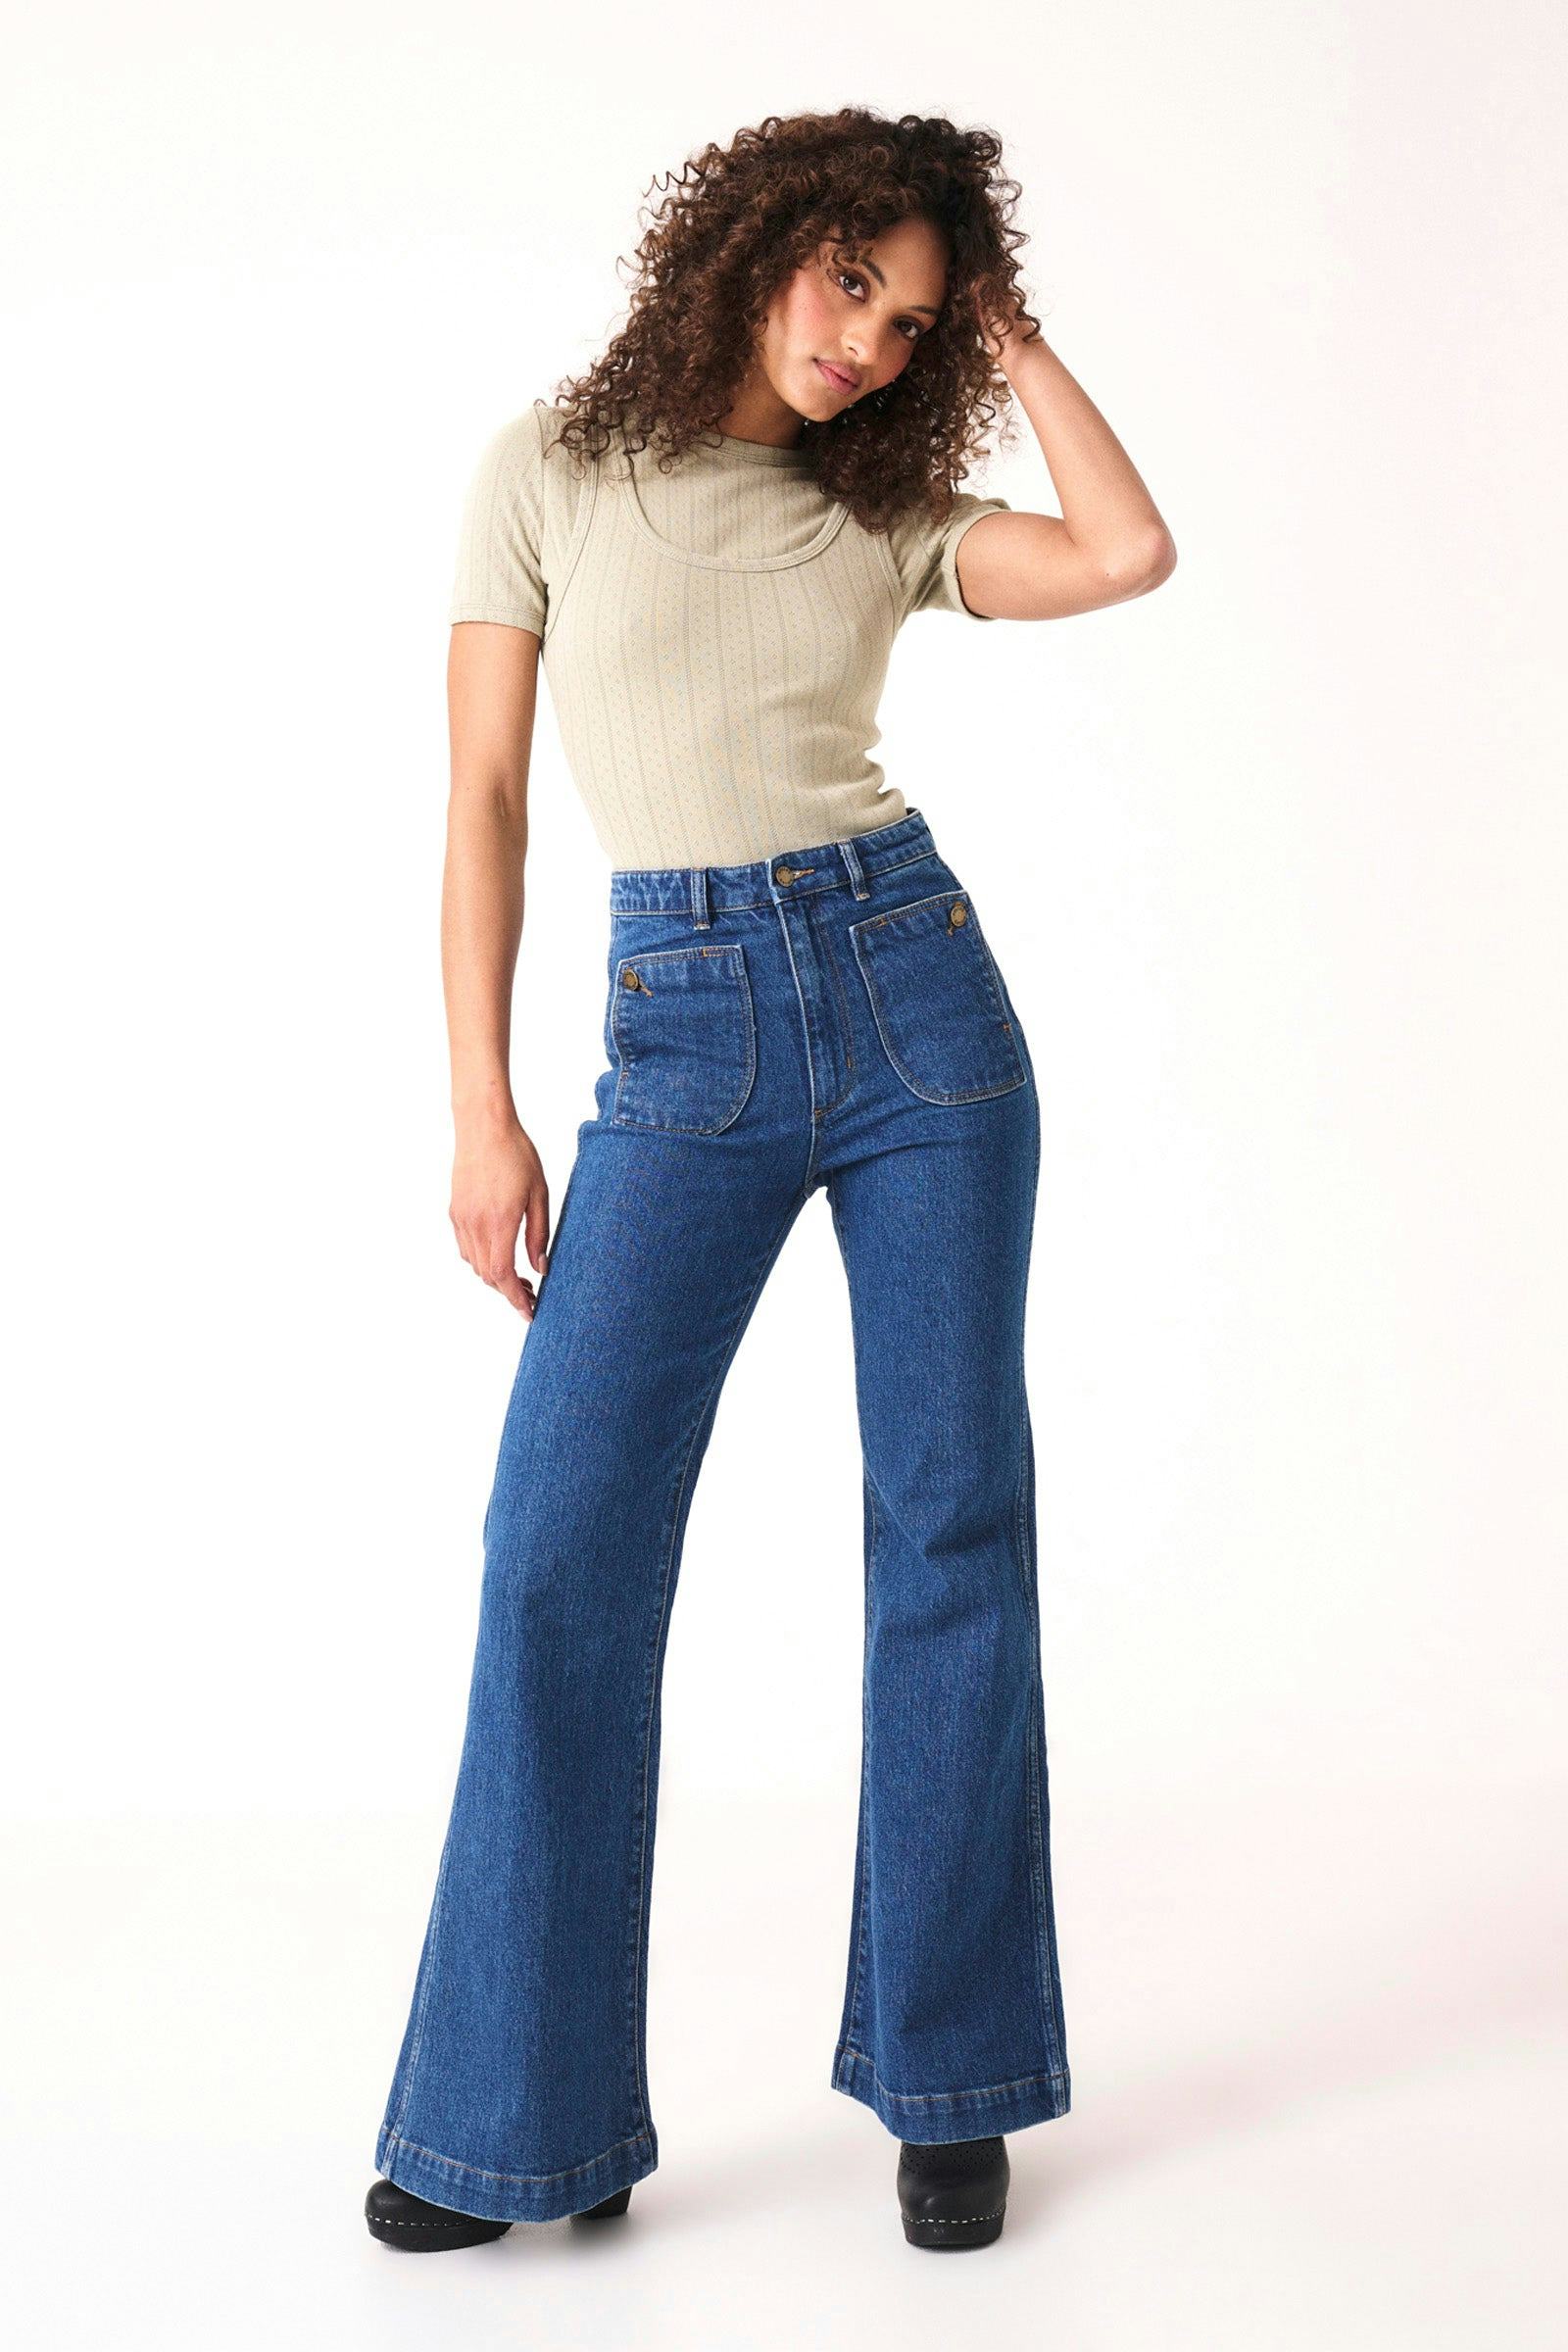 Rolla's Jeans  Up to 30% Off*